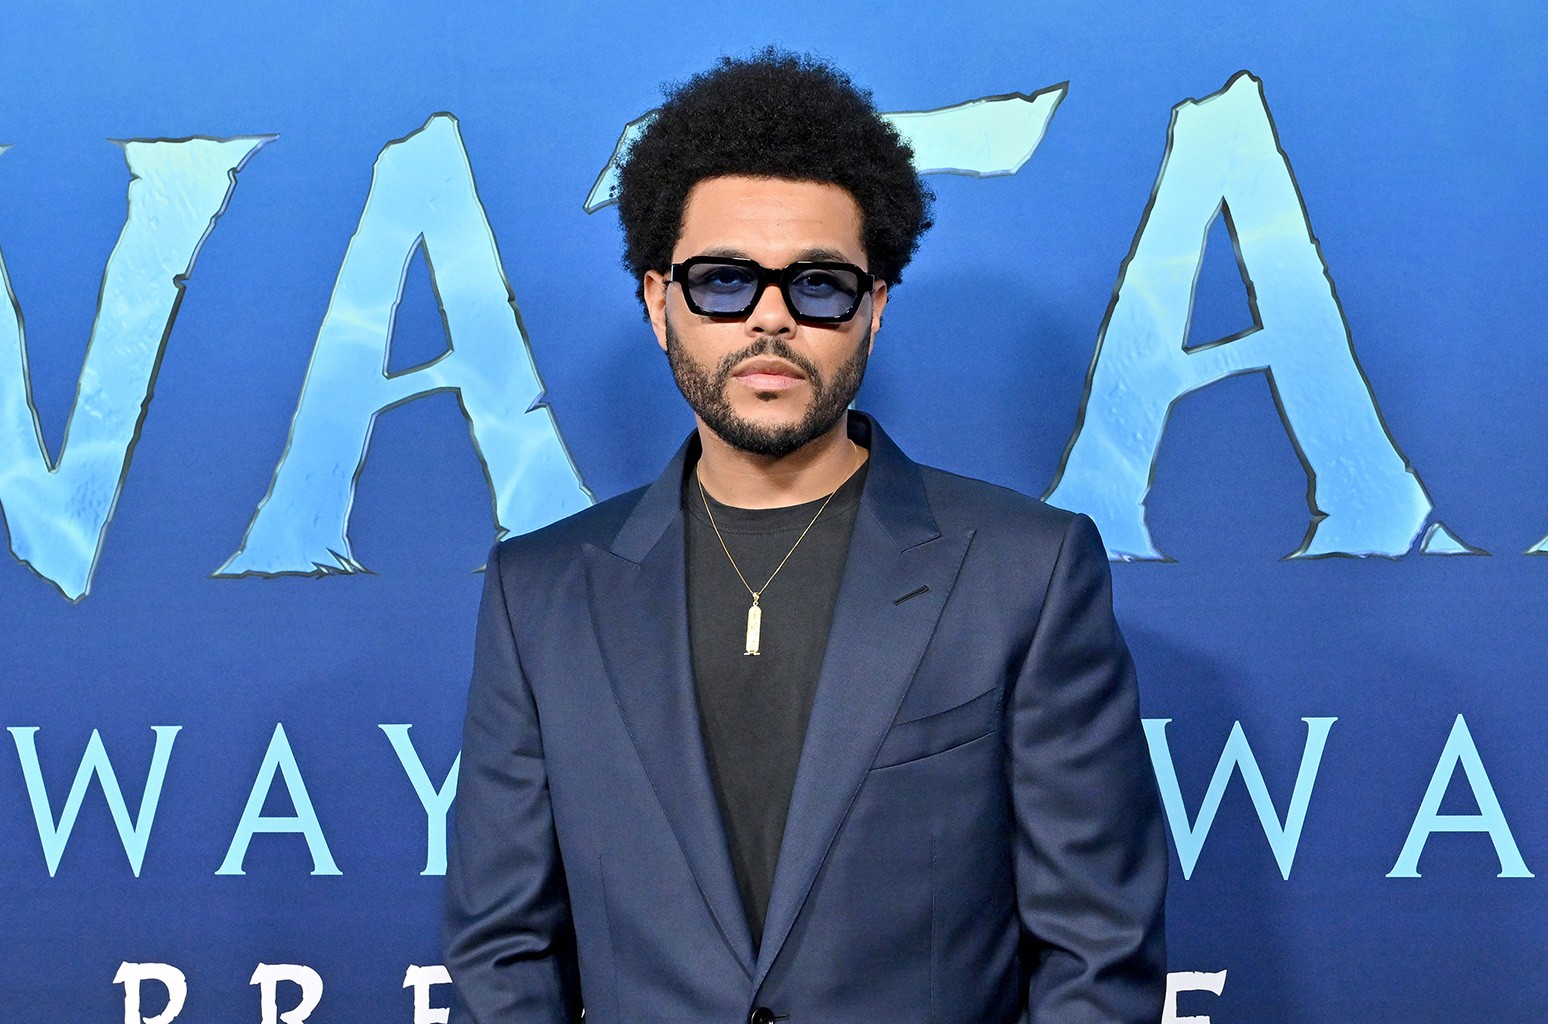 The Weeknd on Avatar: The Way of Water premiere